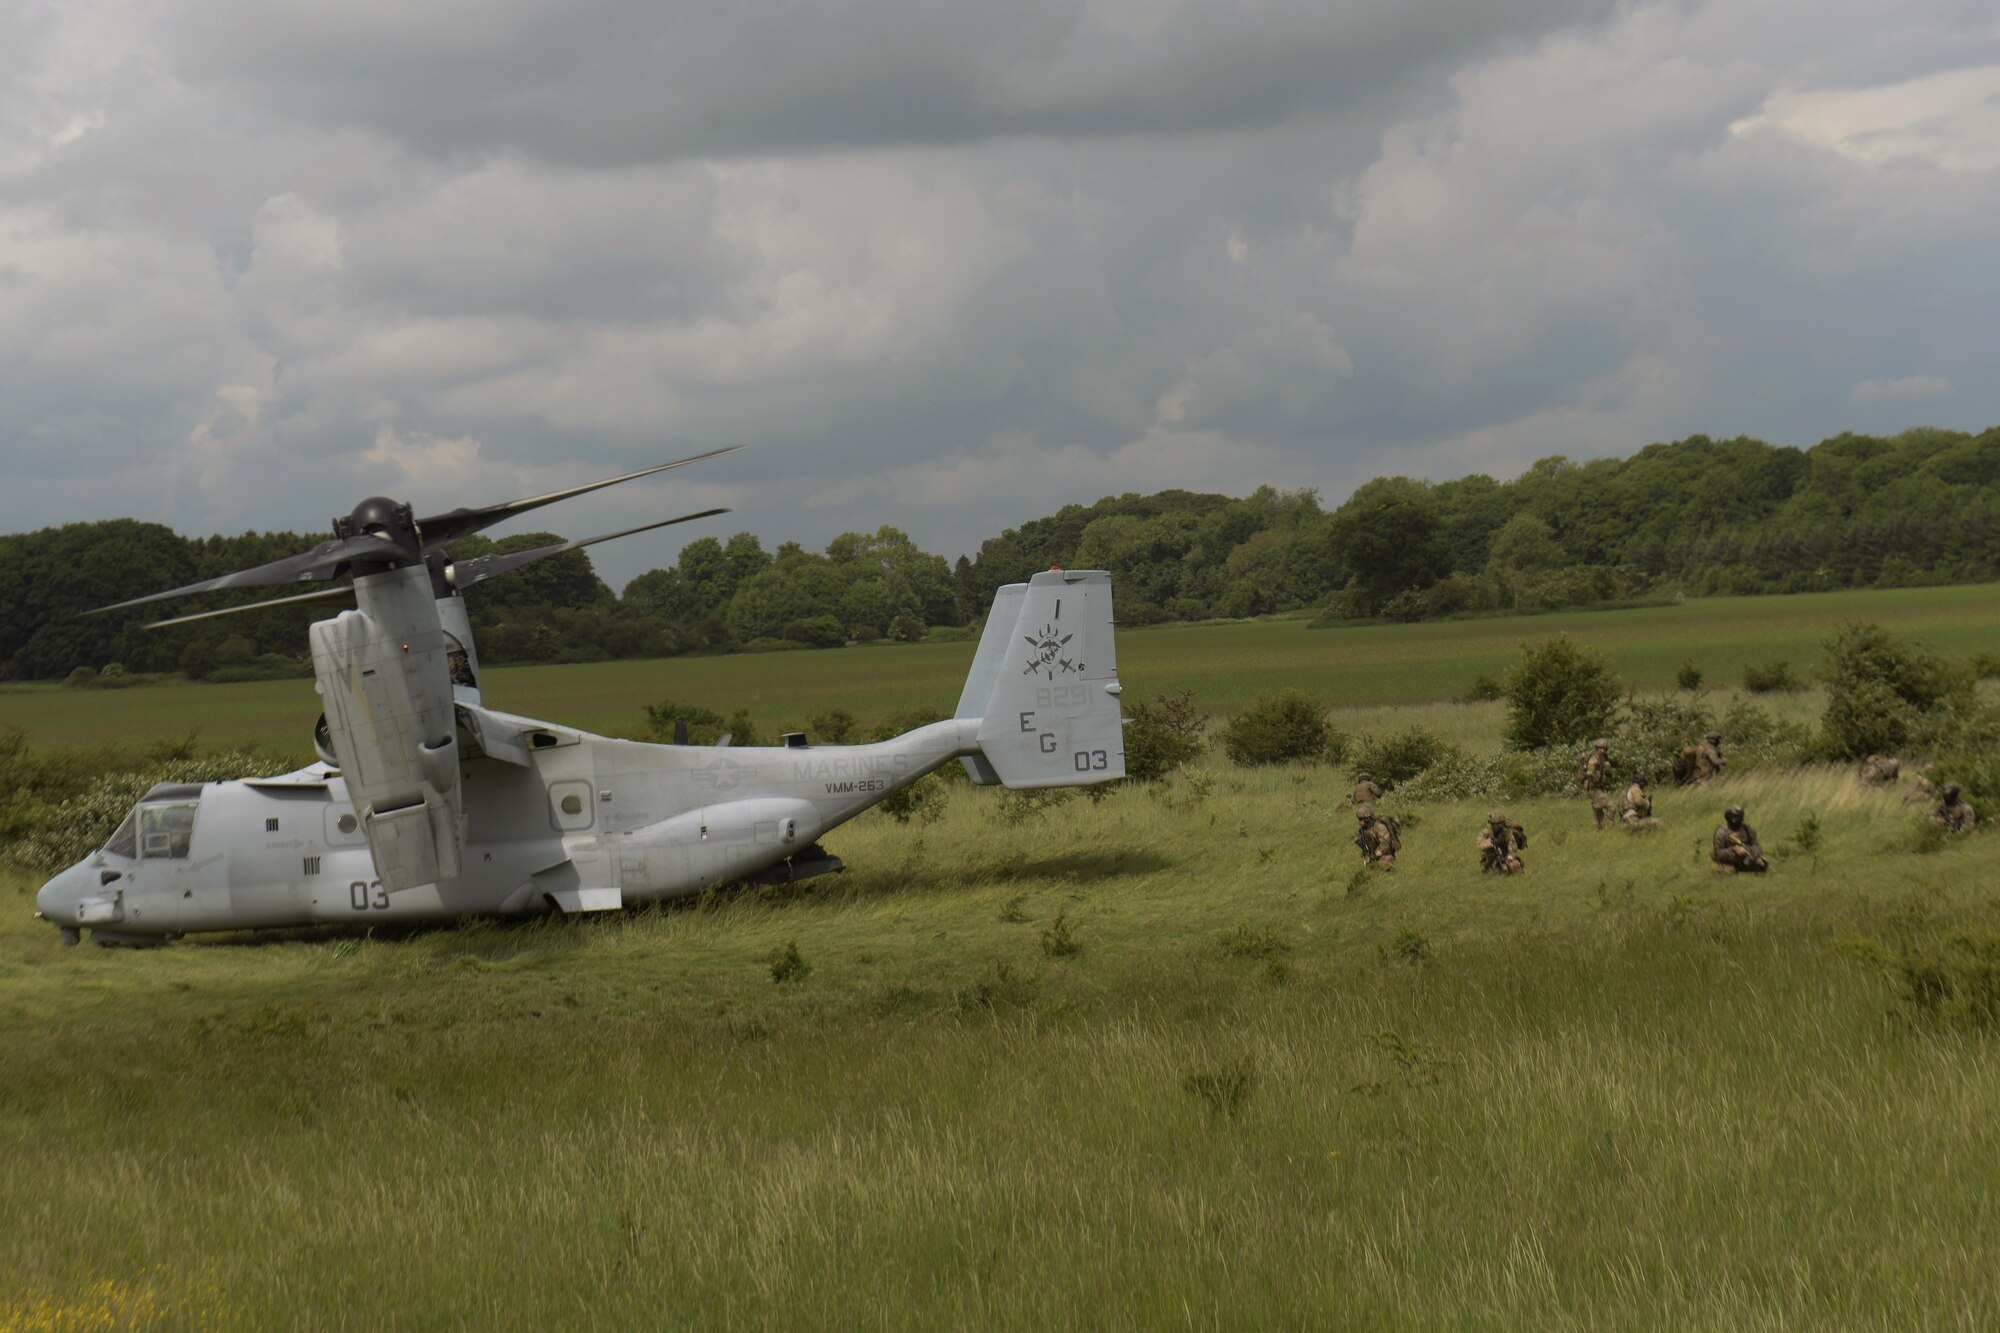 An MV-22 Osprey prepares to depart after dropping off U.S. Marines assigned to the Special-Purpose Marine Air-Ground Task Force Crisis Response Africa unit at Stanford Training Area, England, June 14. The training enabled 57th Rescue Squadron pararescuemen and the Marines to cohesively work together in a training environment to provide insight on how each service operates downrange. (U.S. Air Force photo/Airman 1st Class Abby L. Finkel)